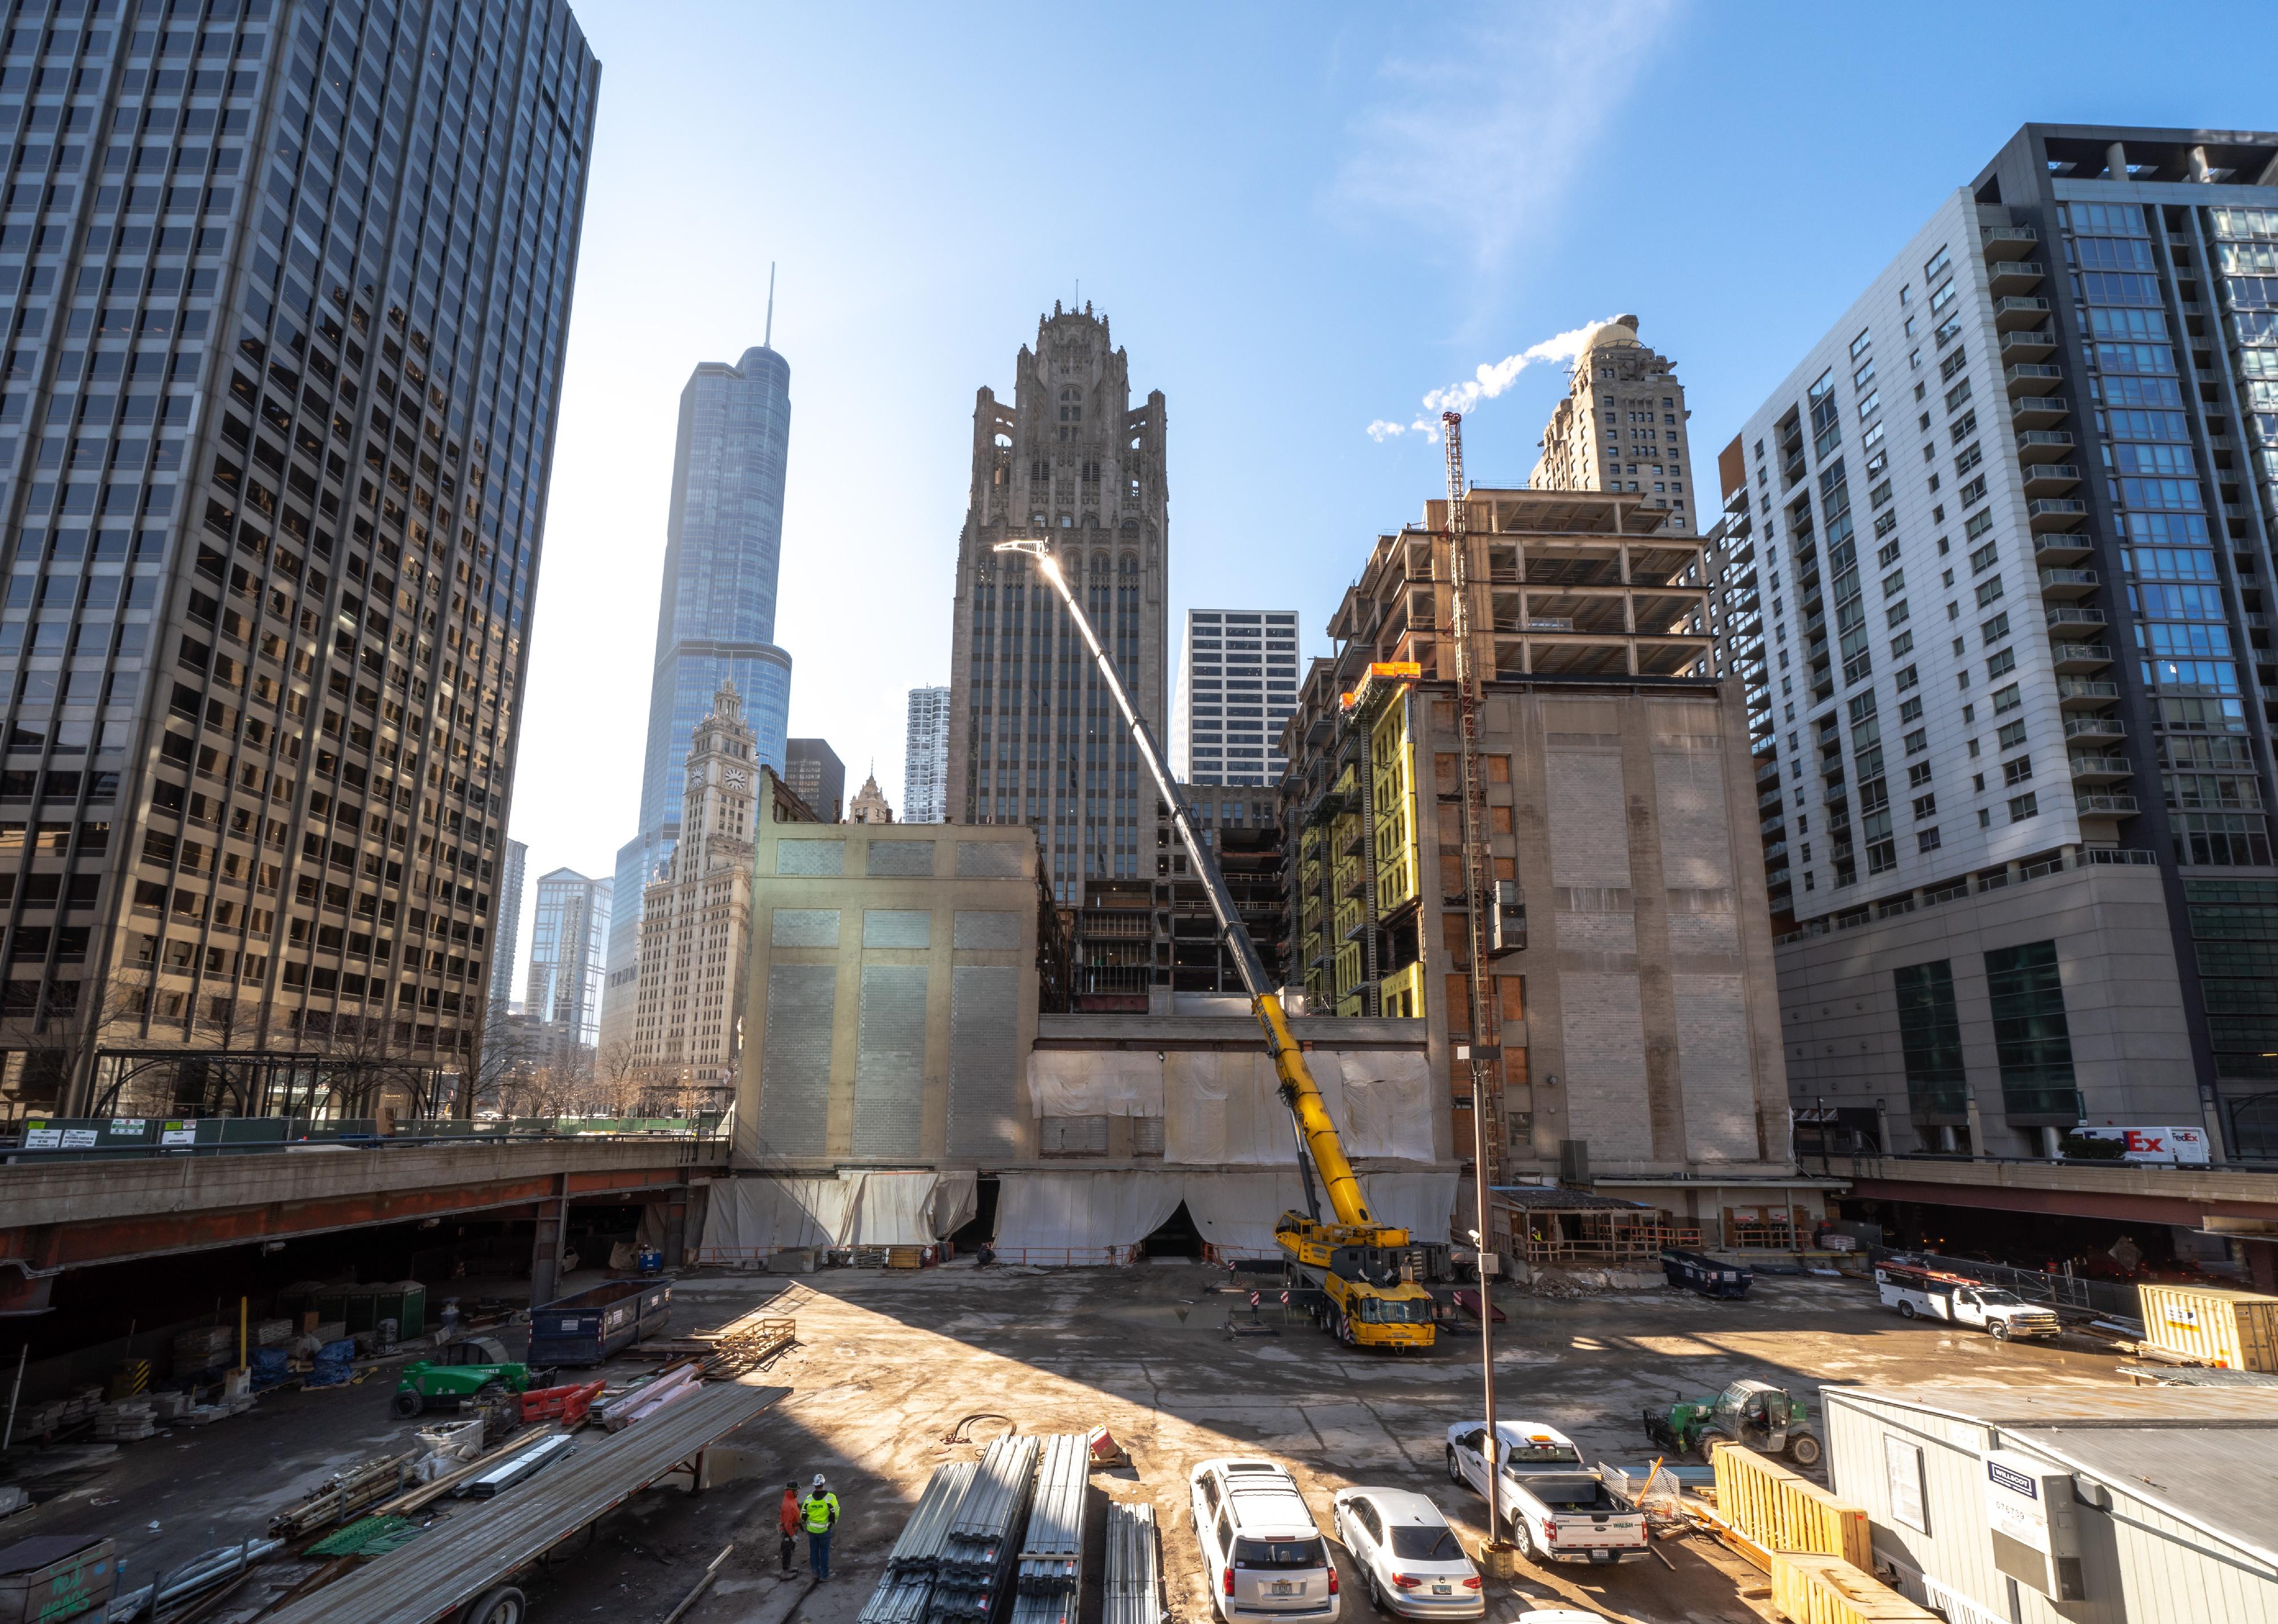 Construction workers converting the Tribune Tower in Chicago into residential condominiums in downtown.